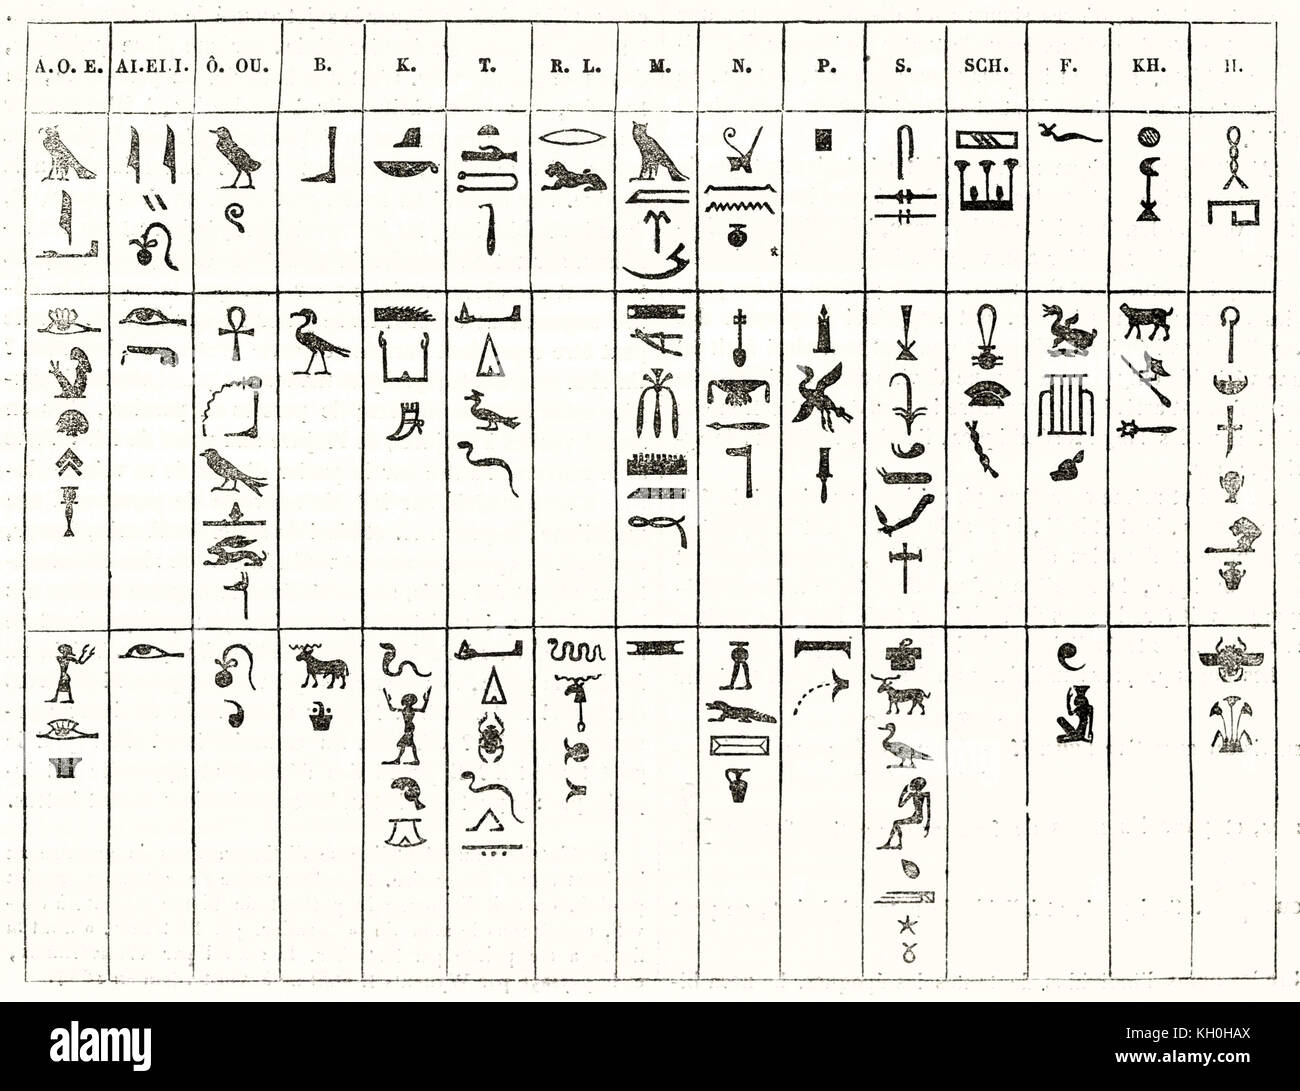 Egyptian hieroglyphs phonetic plate. Publ. on Magasin Pittoresque, Paris, 1847 Stock Photo